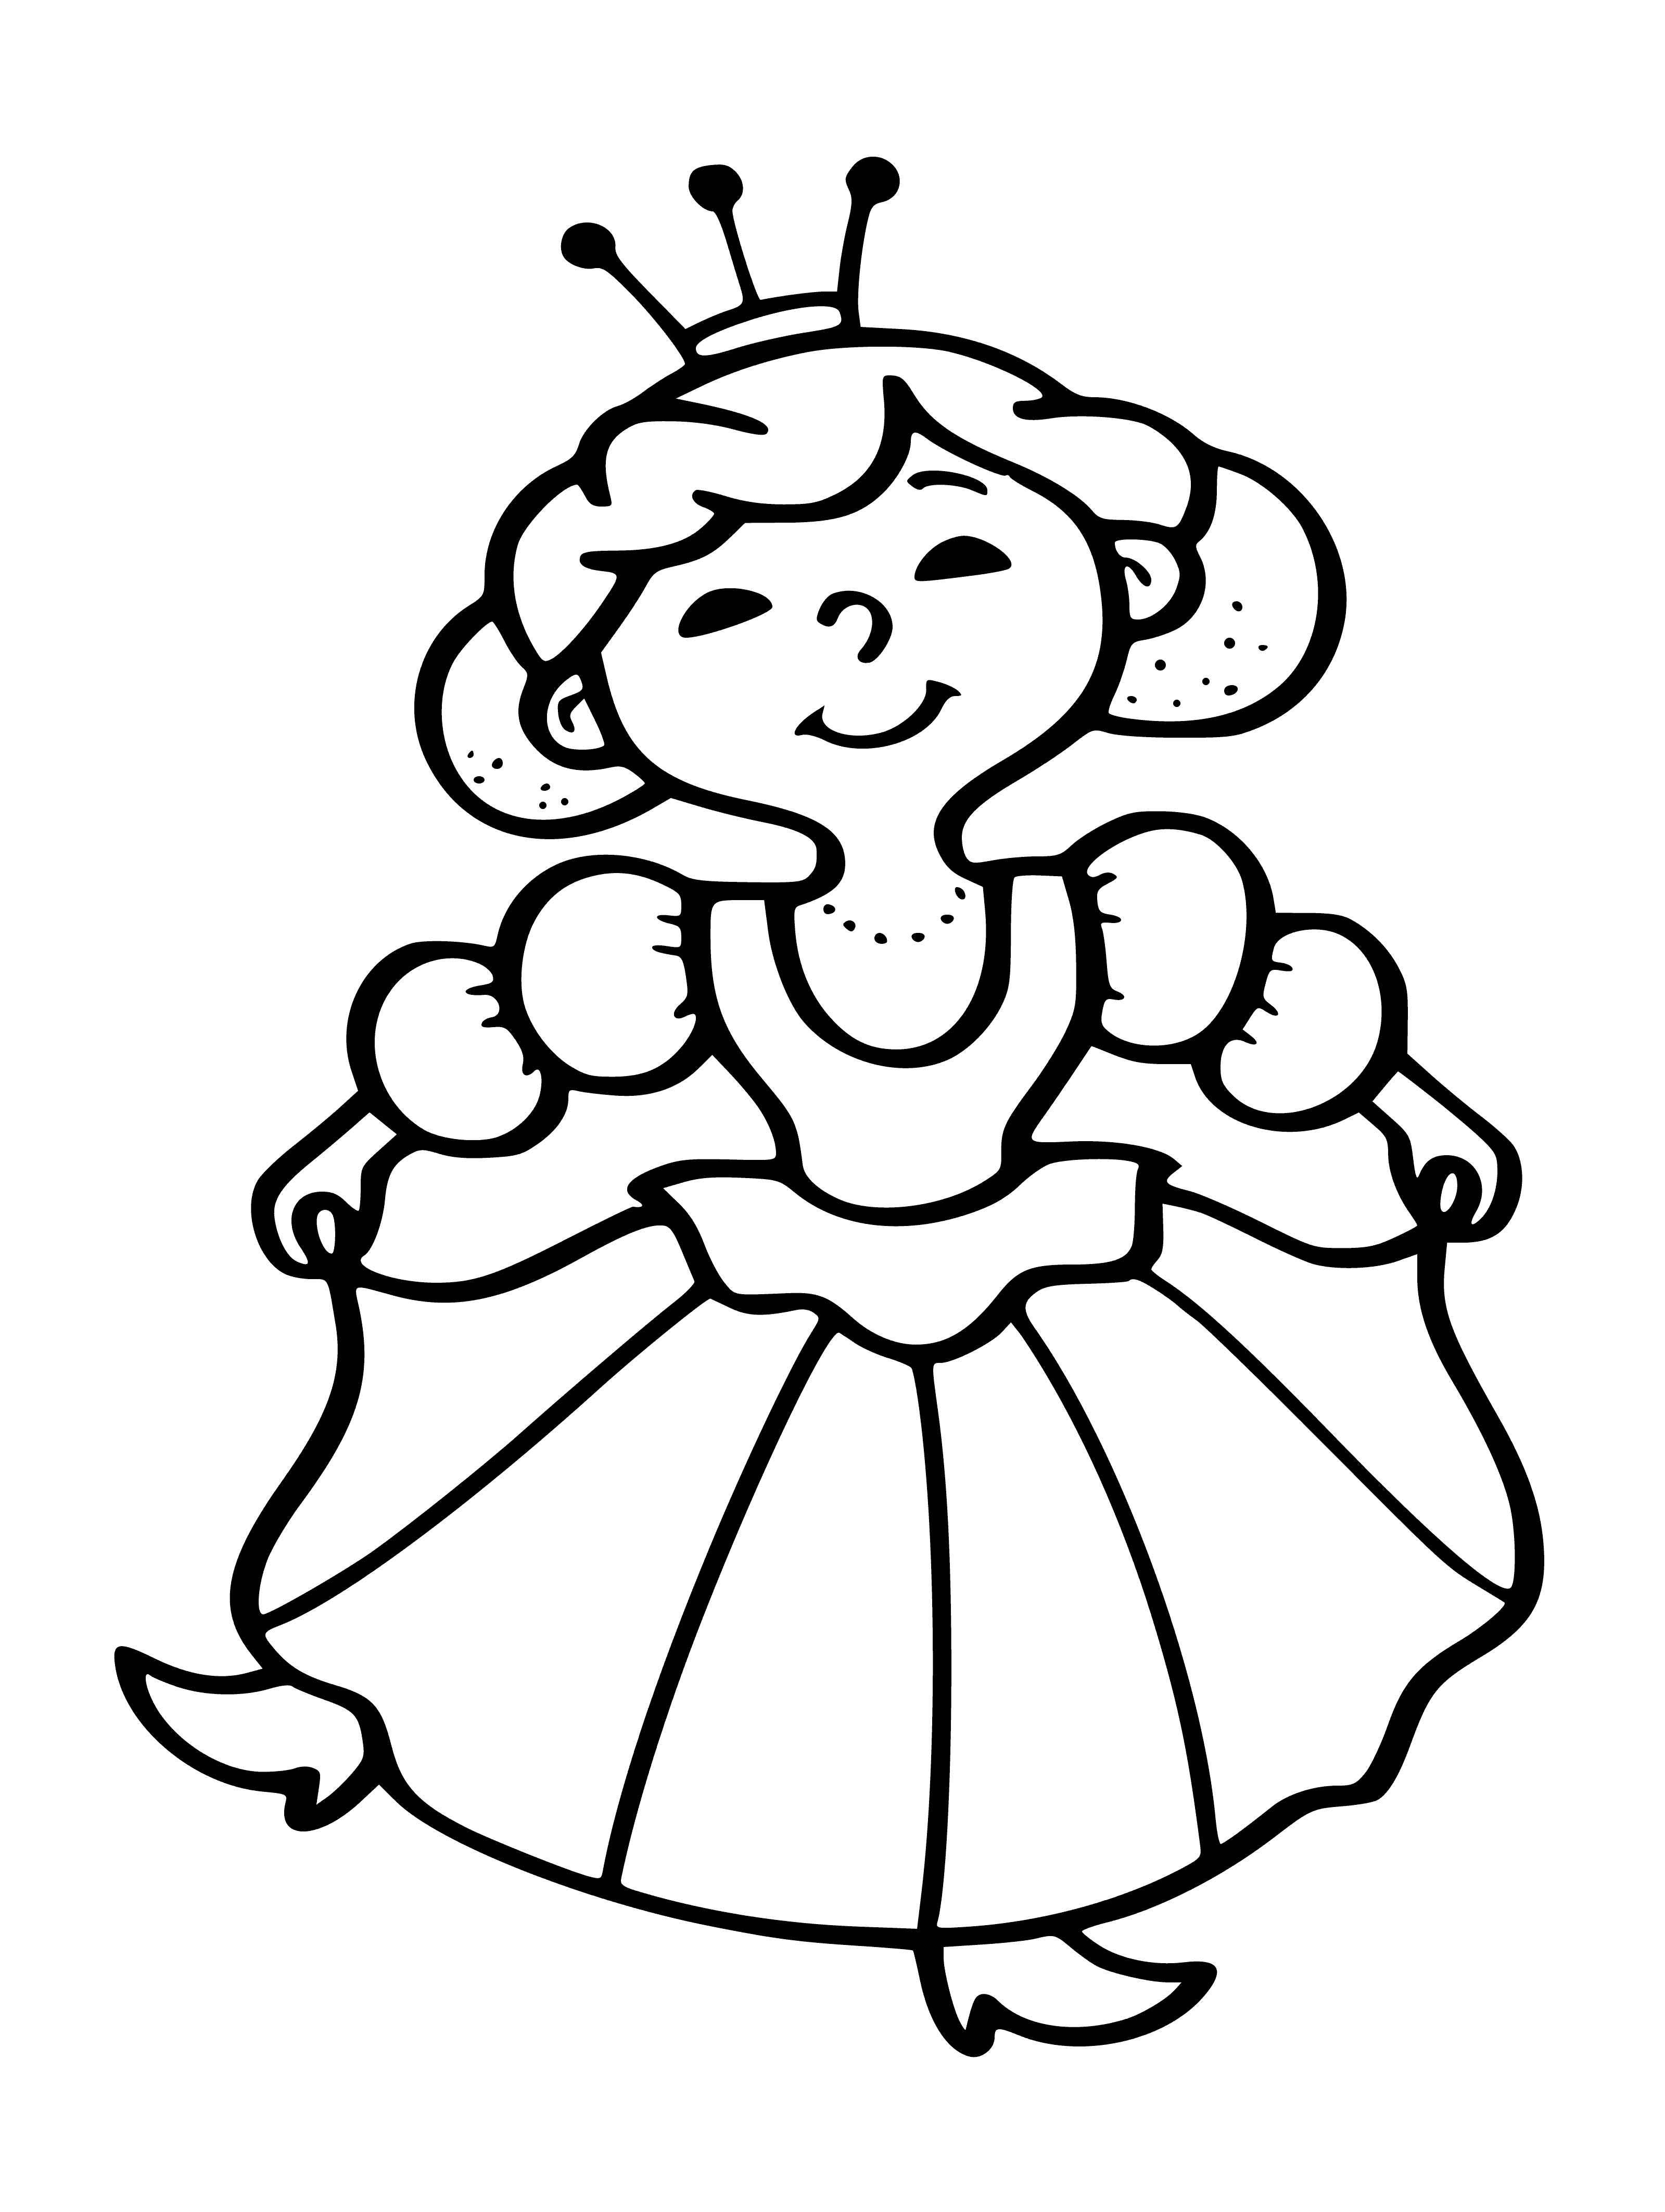 coloring page: Little girl in princess dress, tiara, wand & book surrounded by stuffed animals.